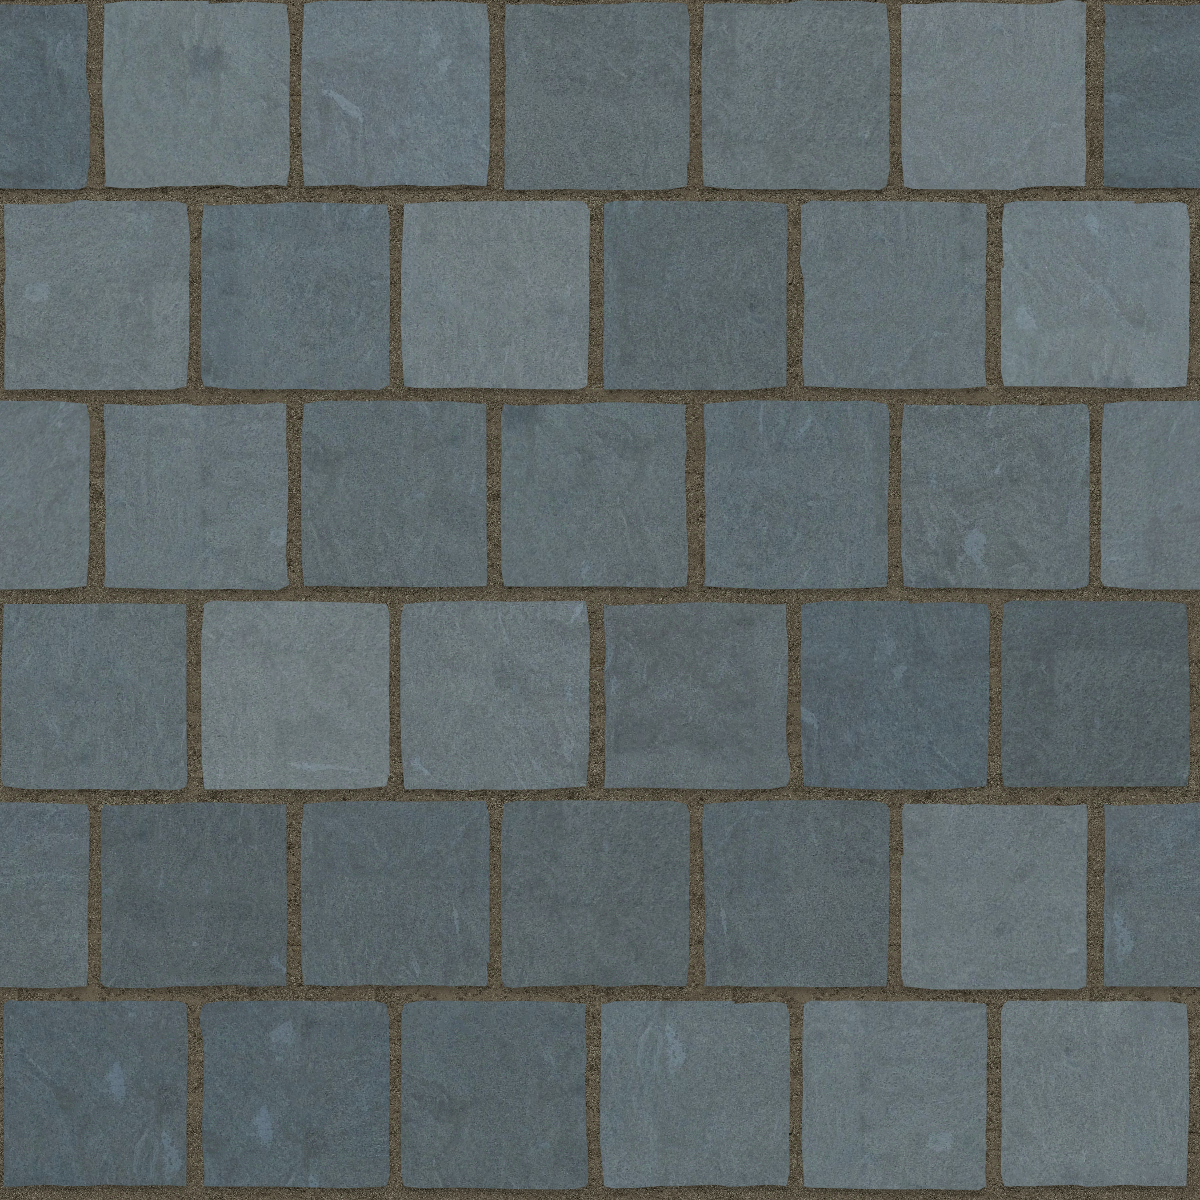 A seamless stone texture with slate blocks arranged in a Stretcher pattern